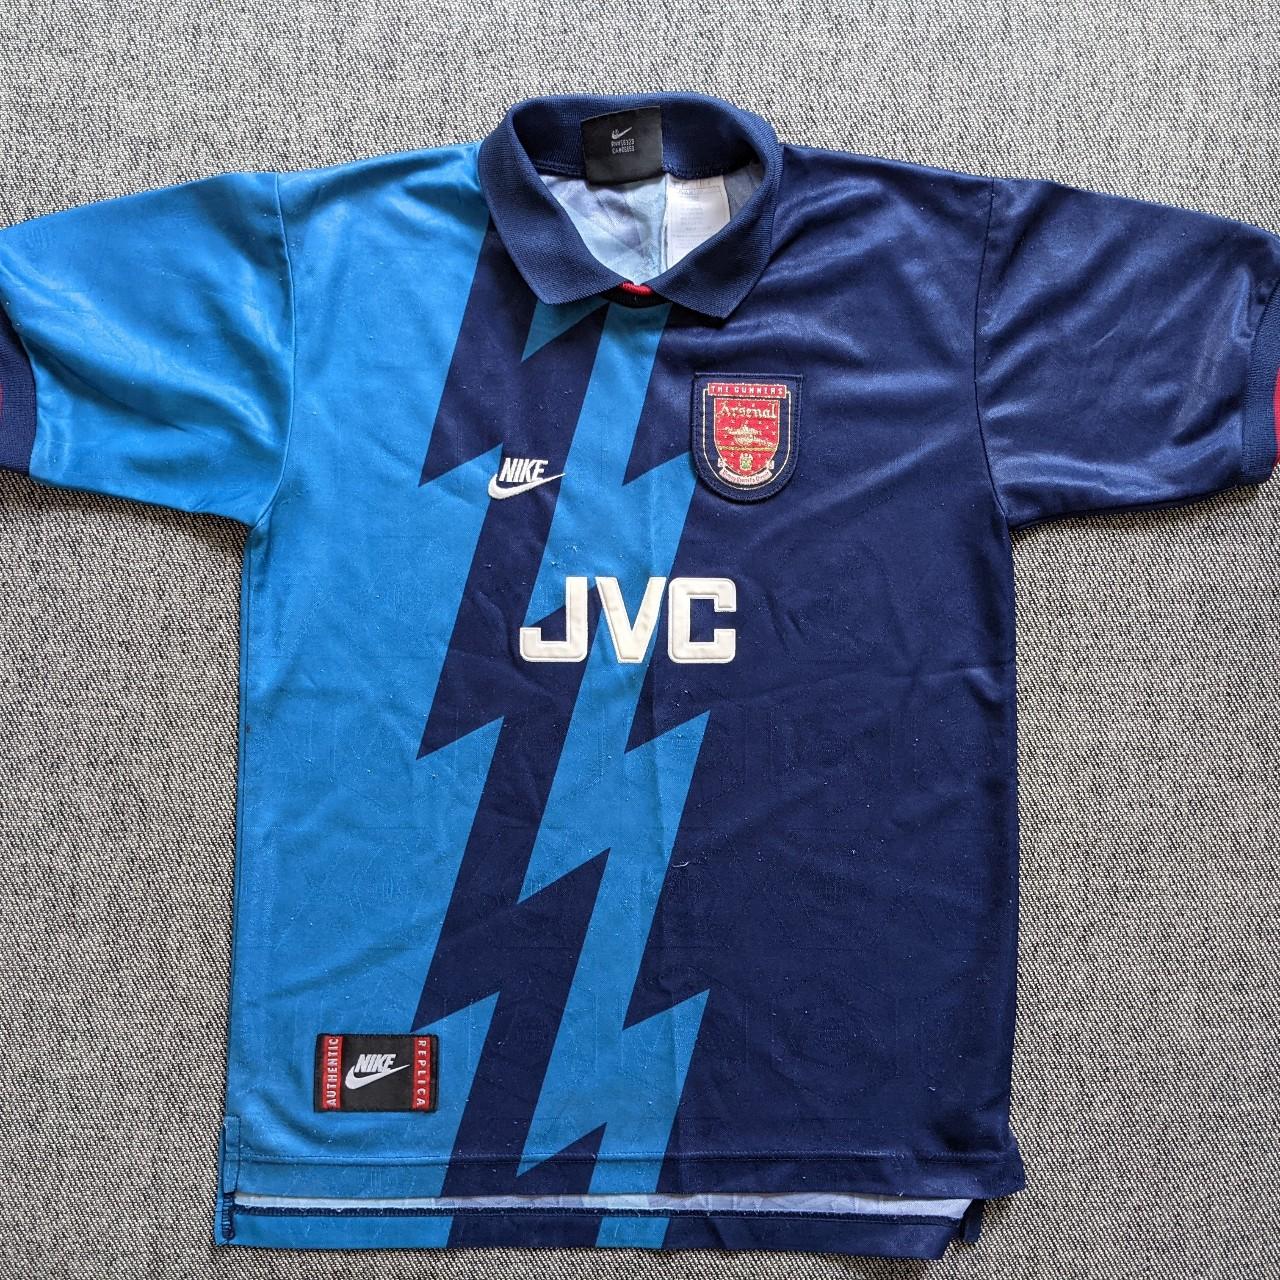 Arsenal away shirt '95 '96 , As described, Size is...